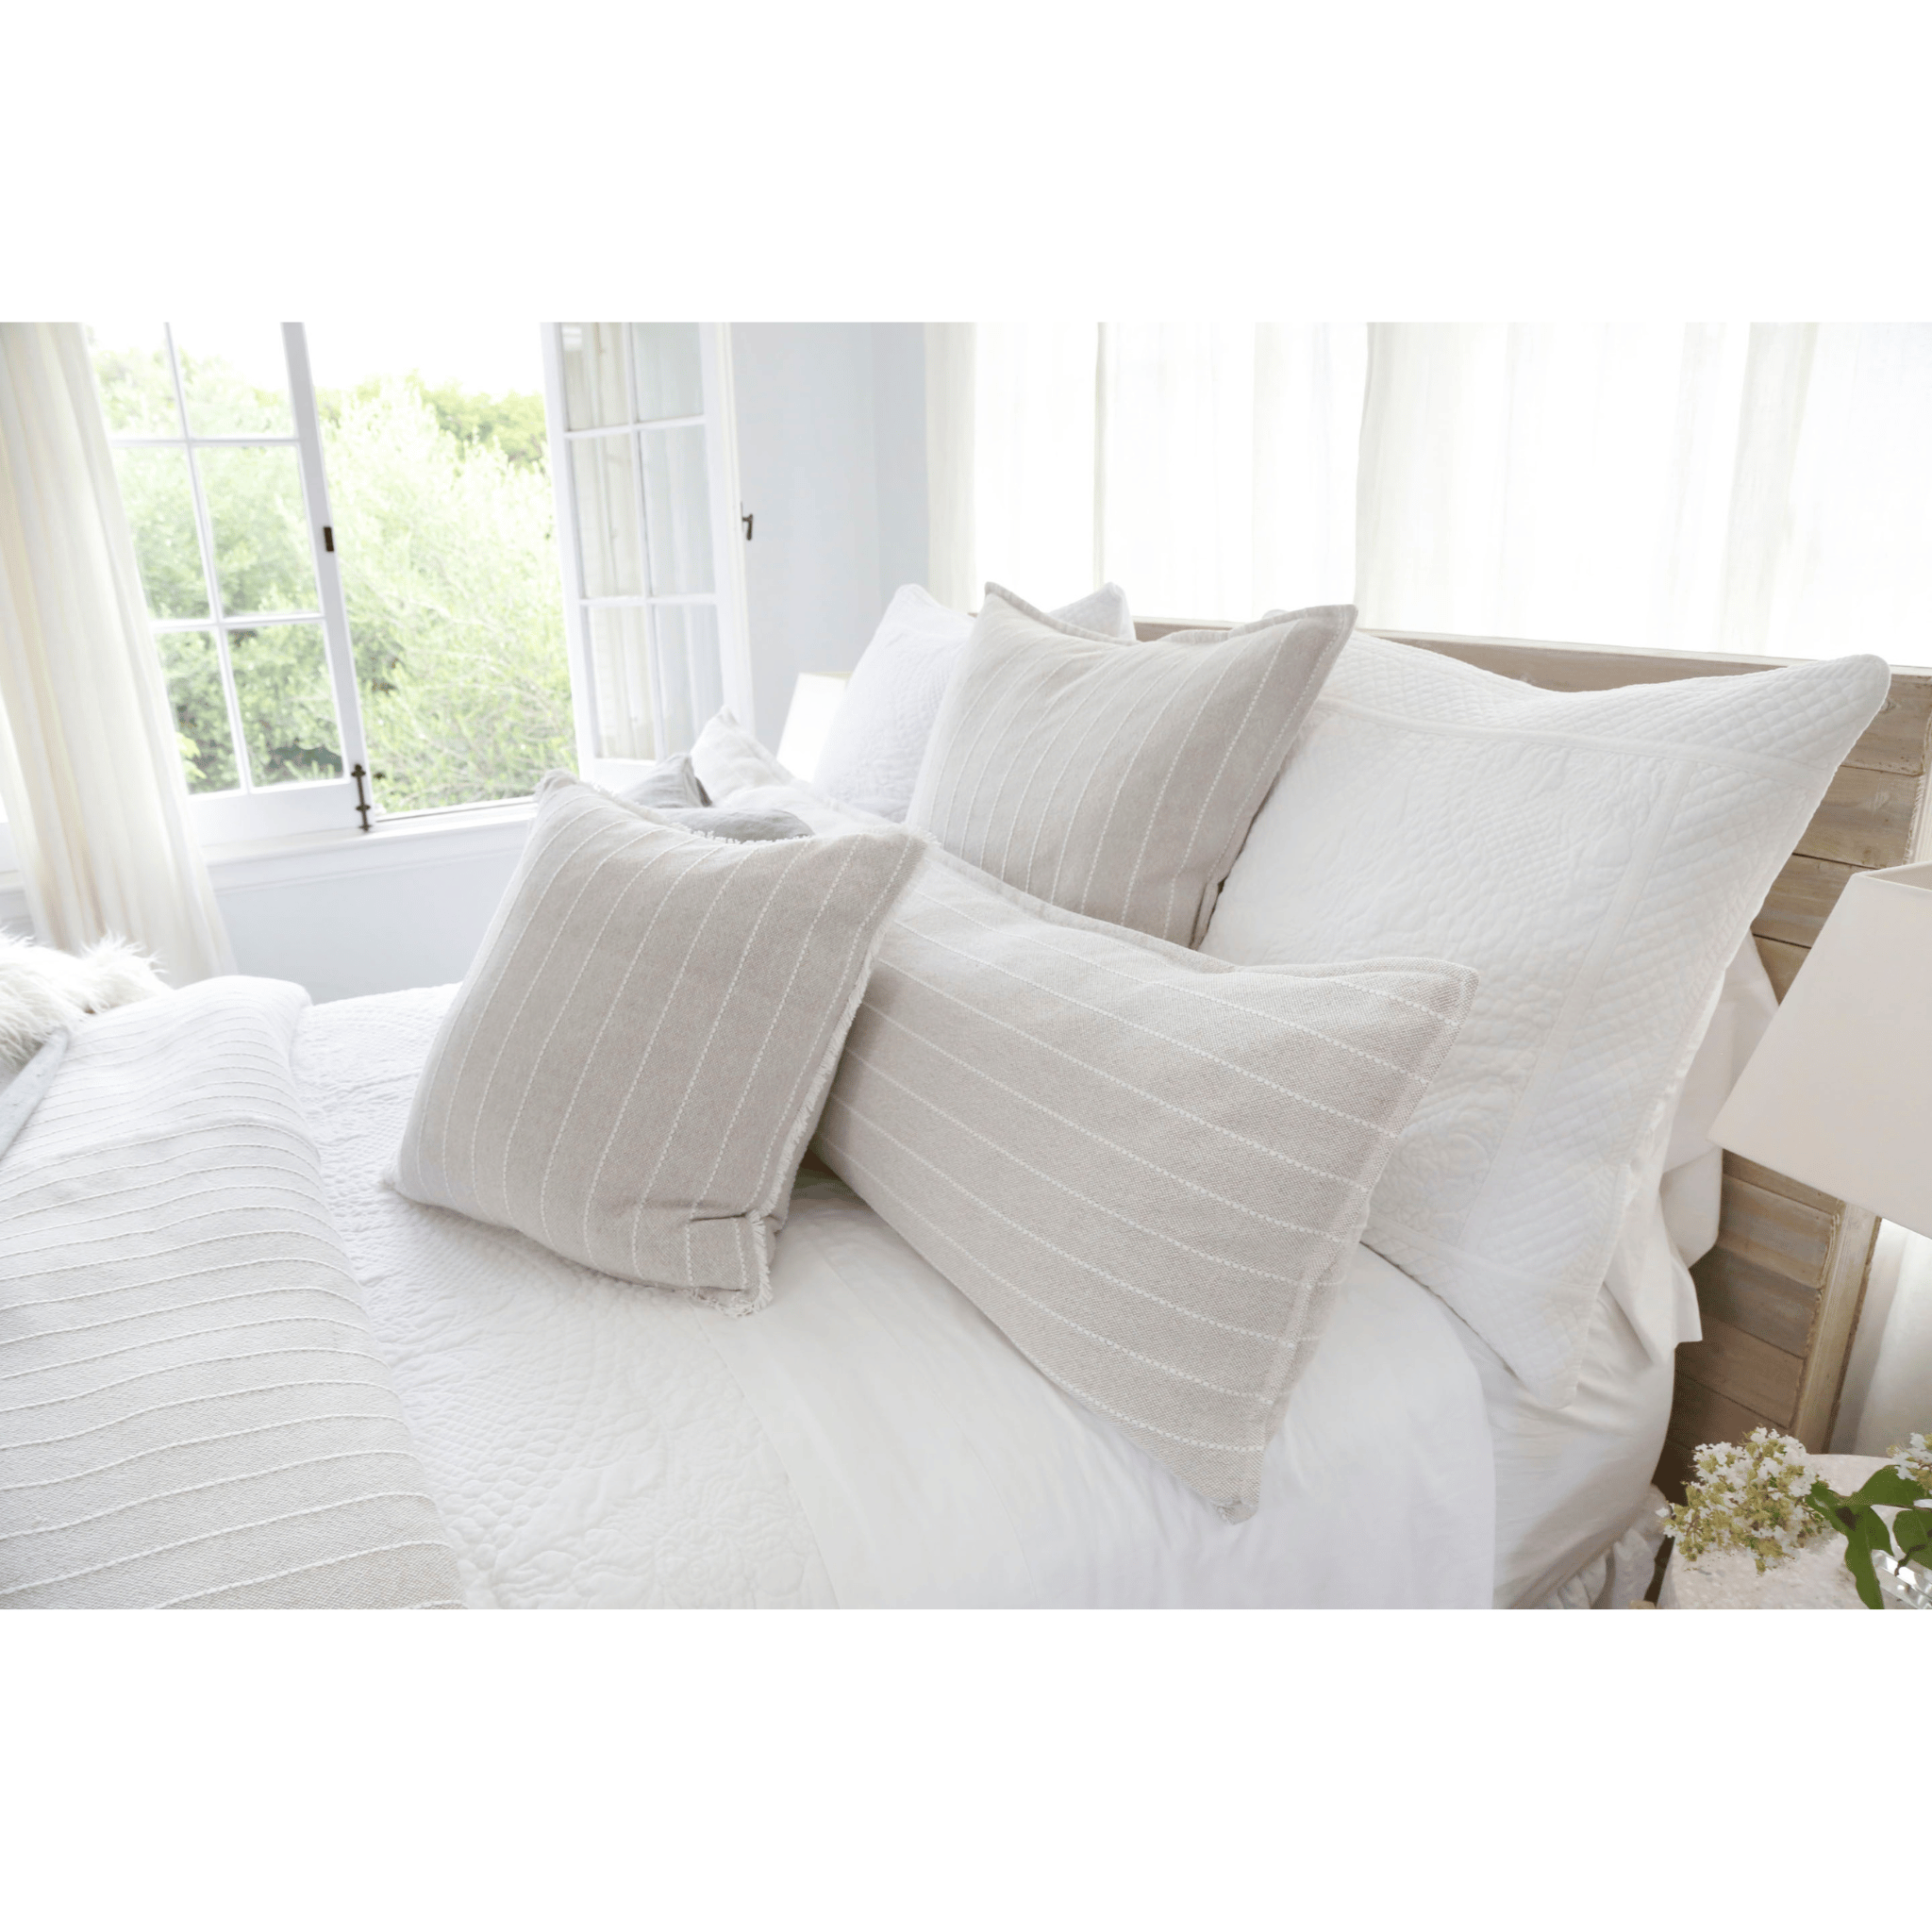 HENLEY BODY PILLOW W/ INSERT - 2 COLORS-Pom Pom at Home